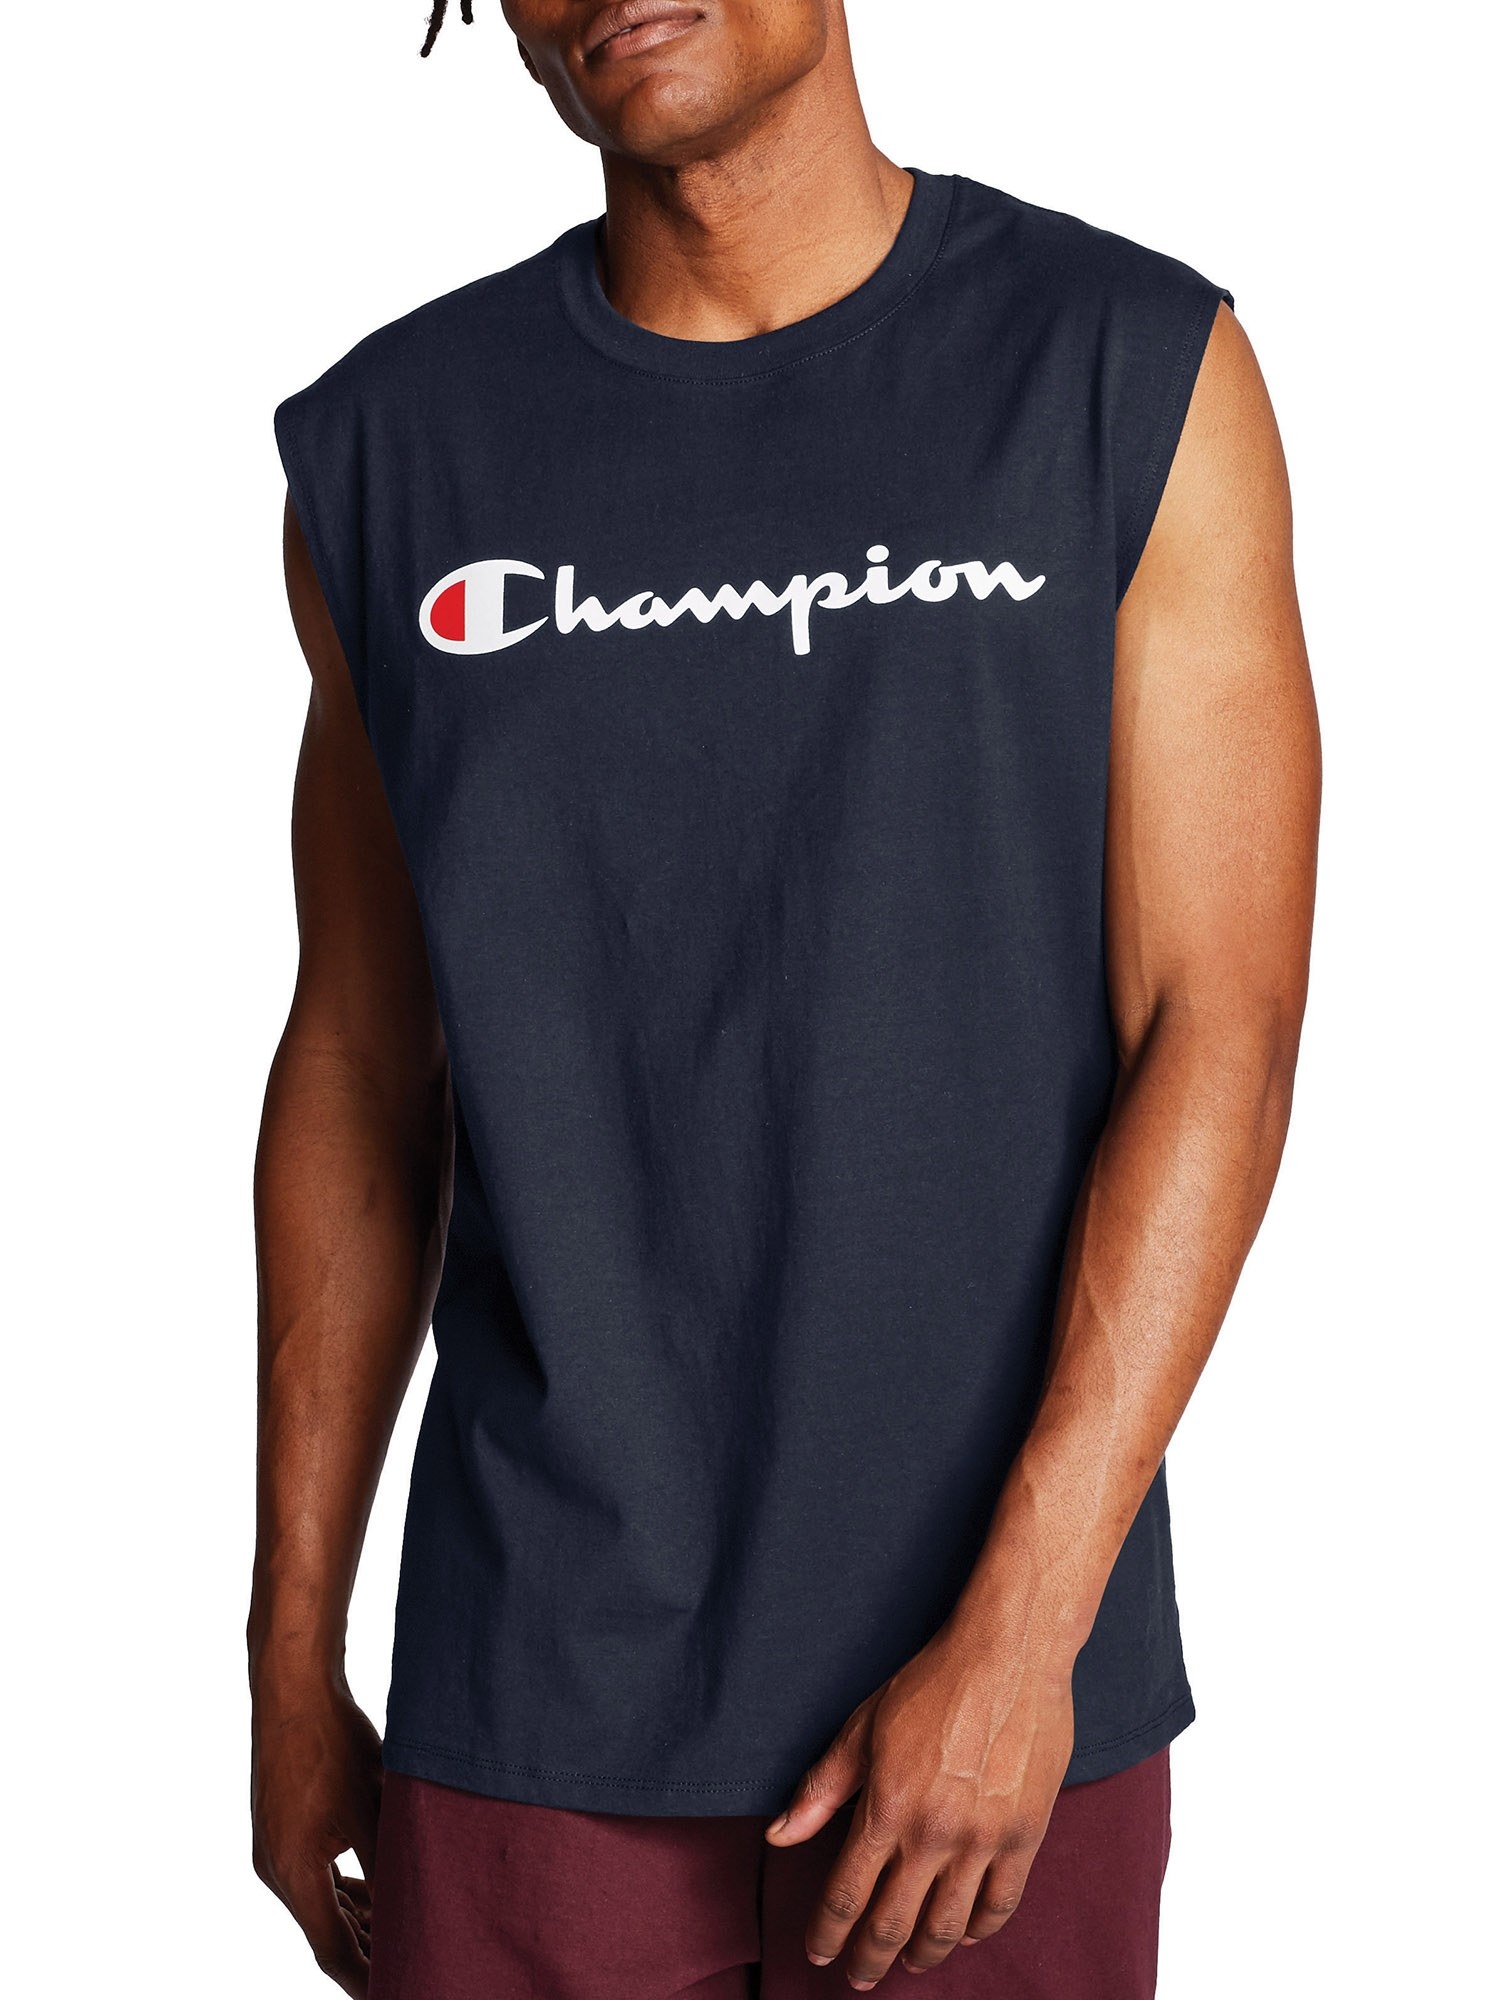 The black muscle tee says &quot;Champion&quot; in white script font